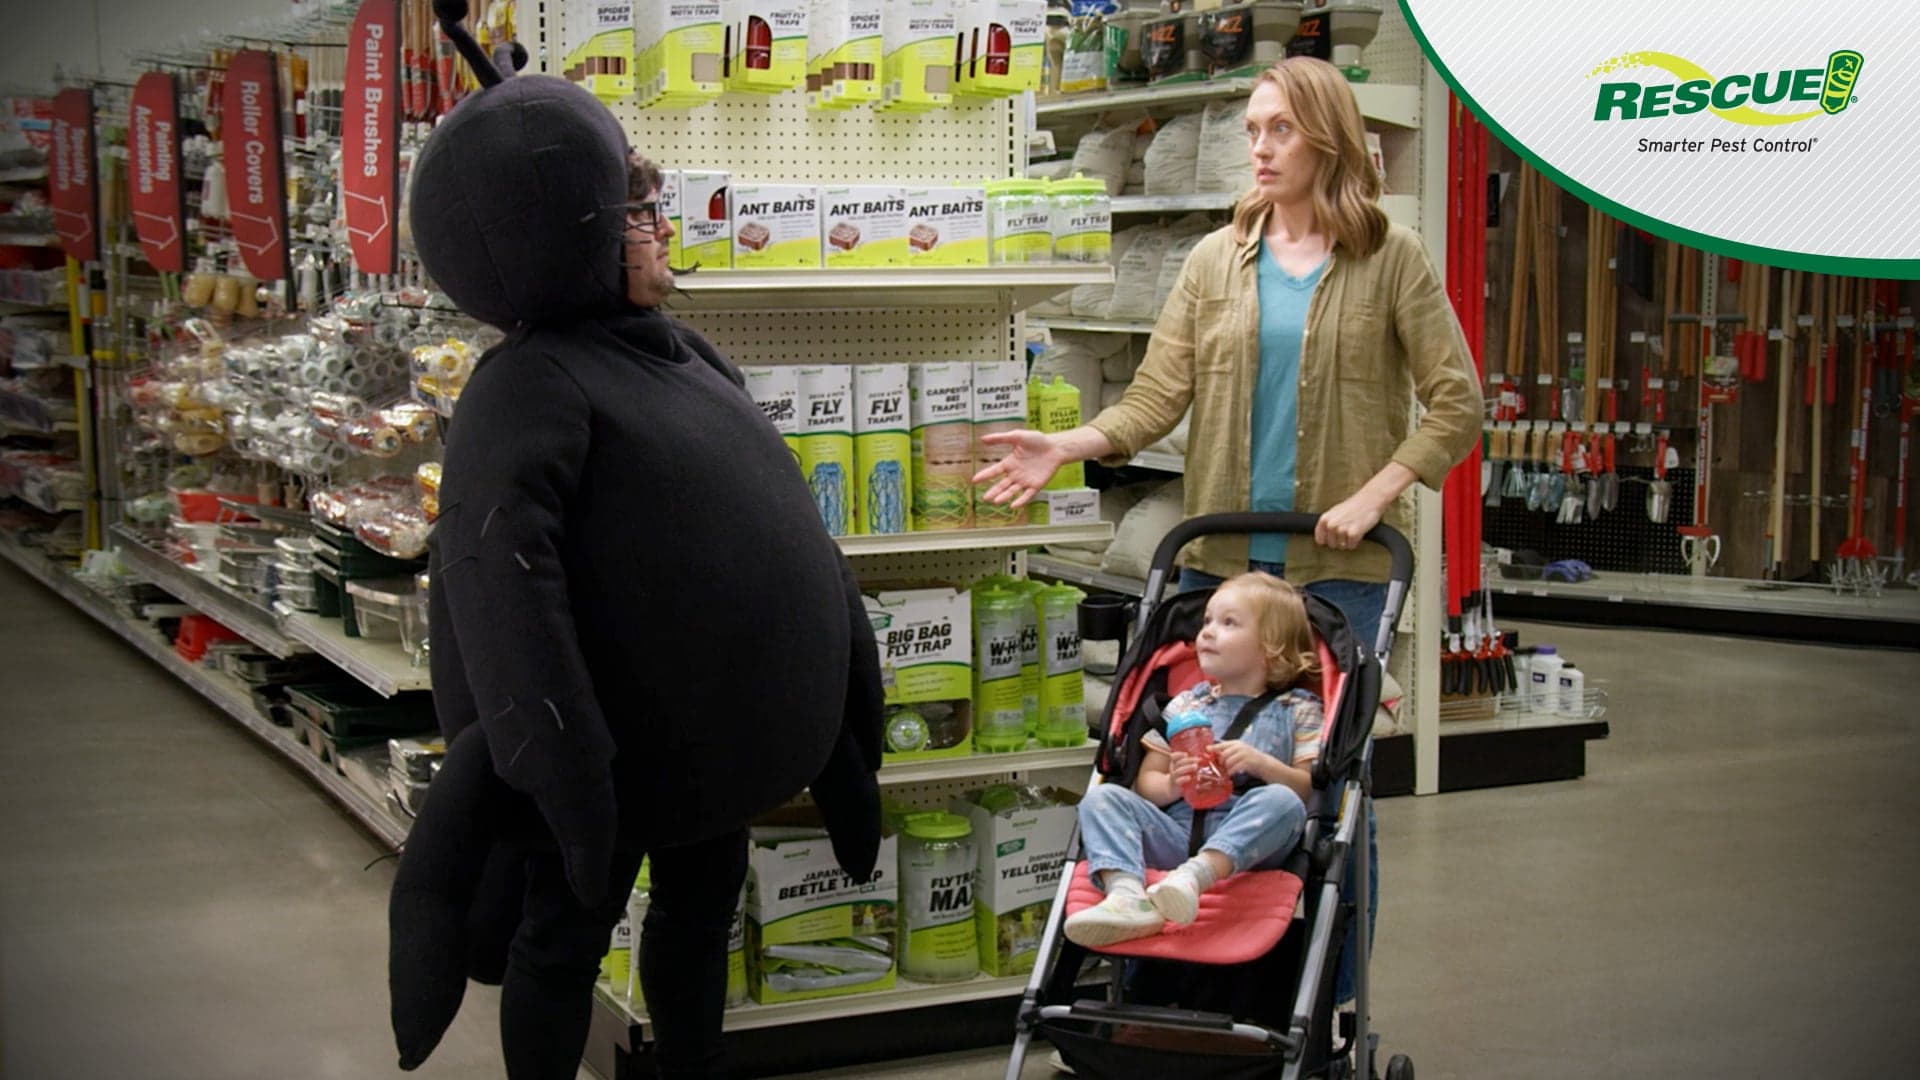 women with child in store talking to man in a spider costume